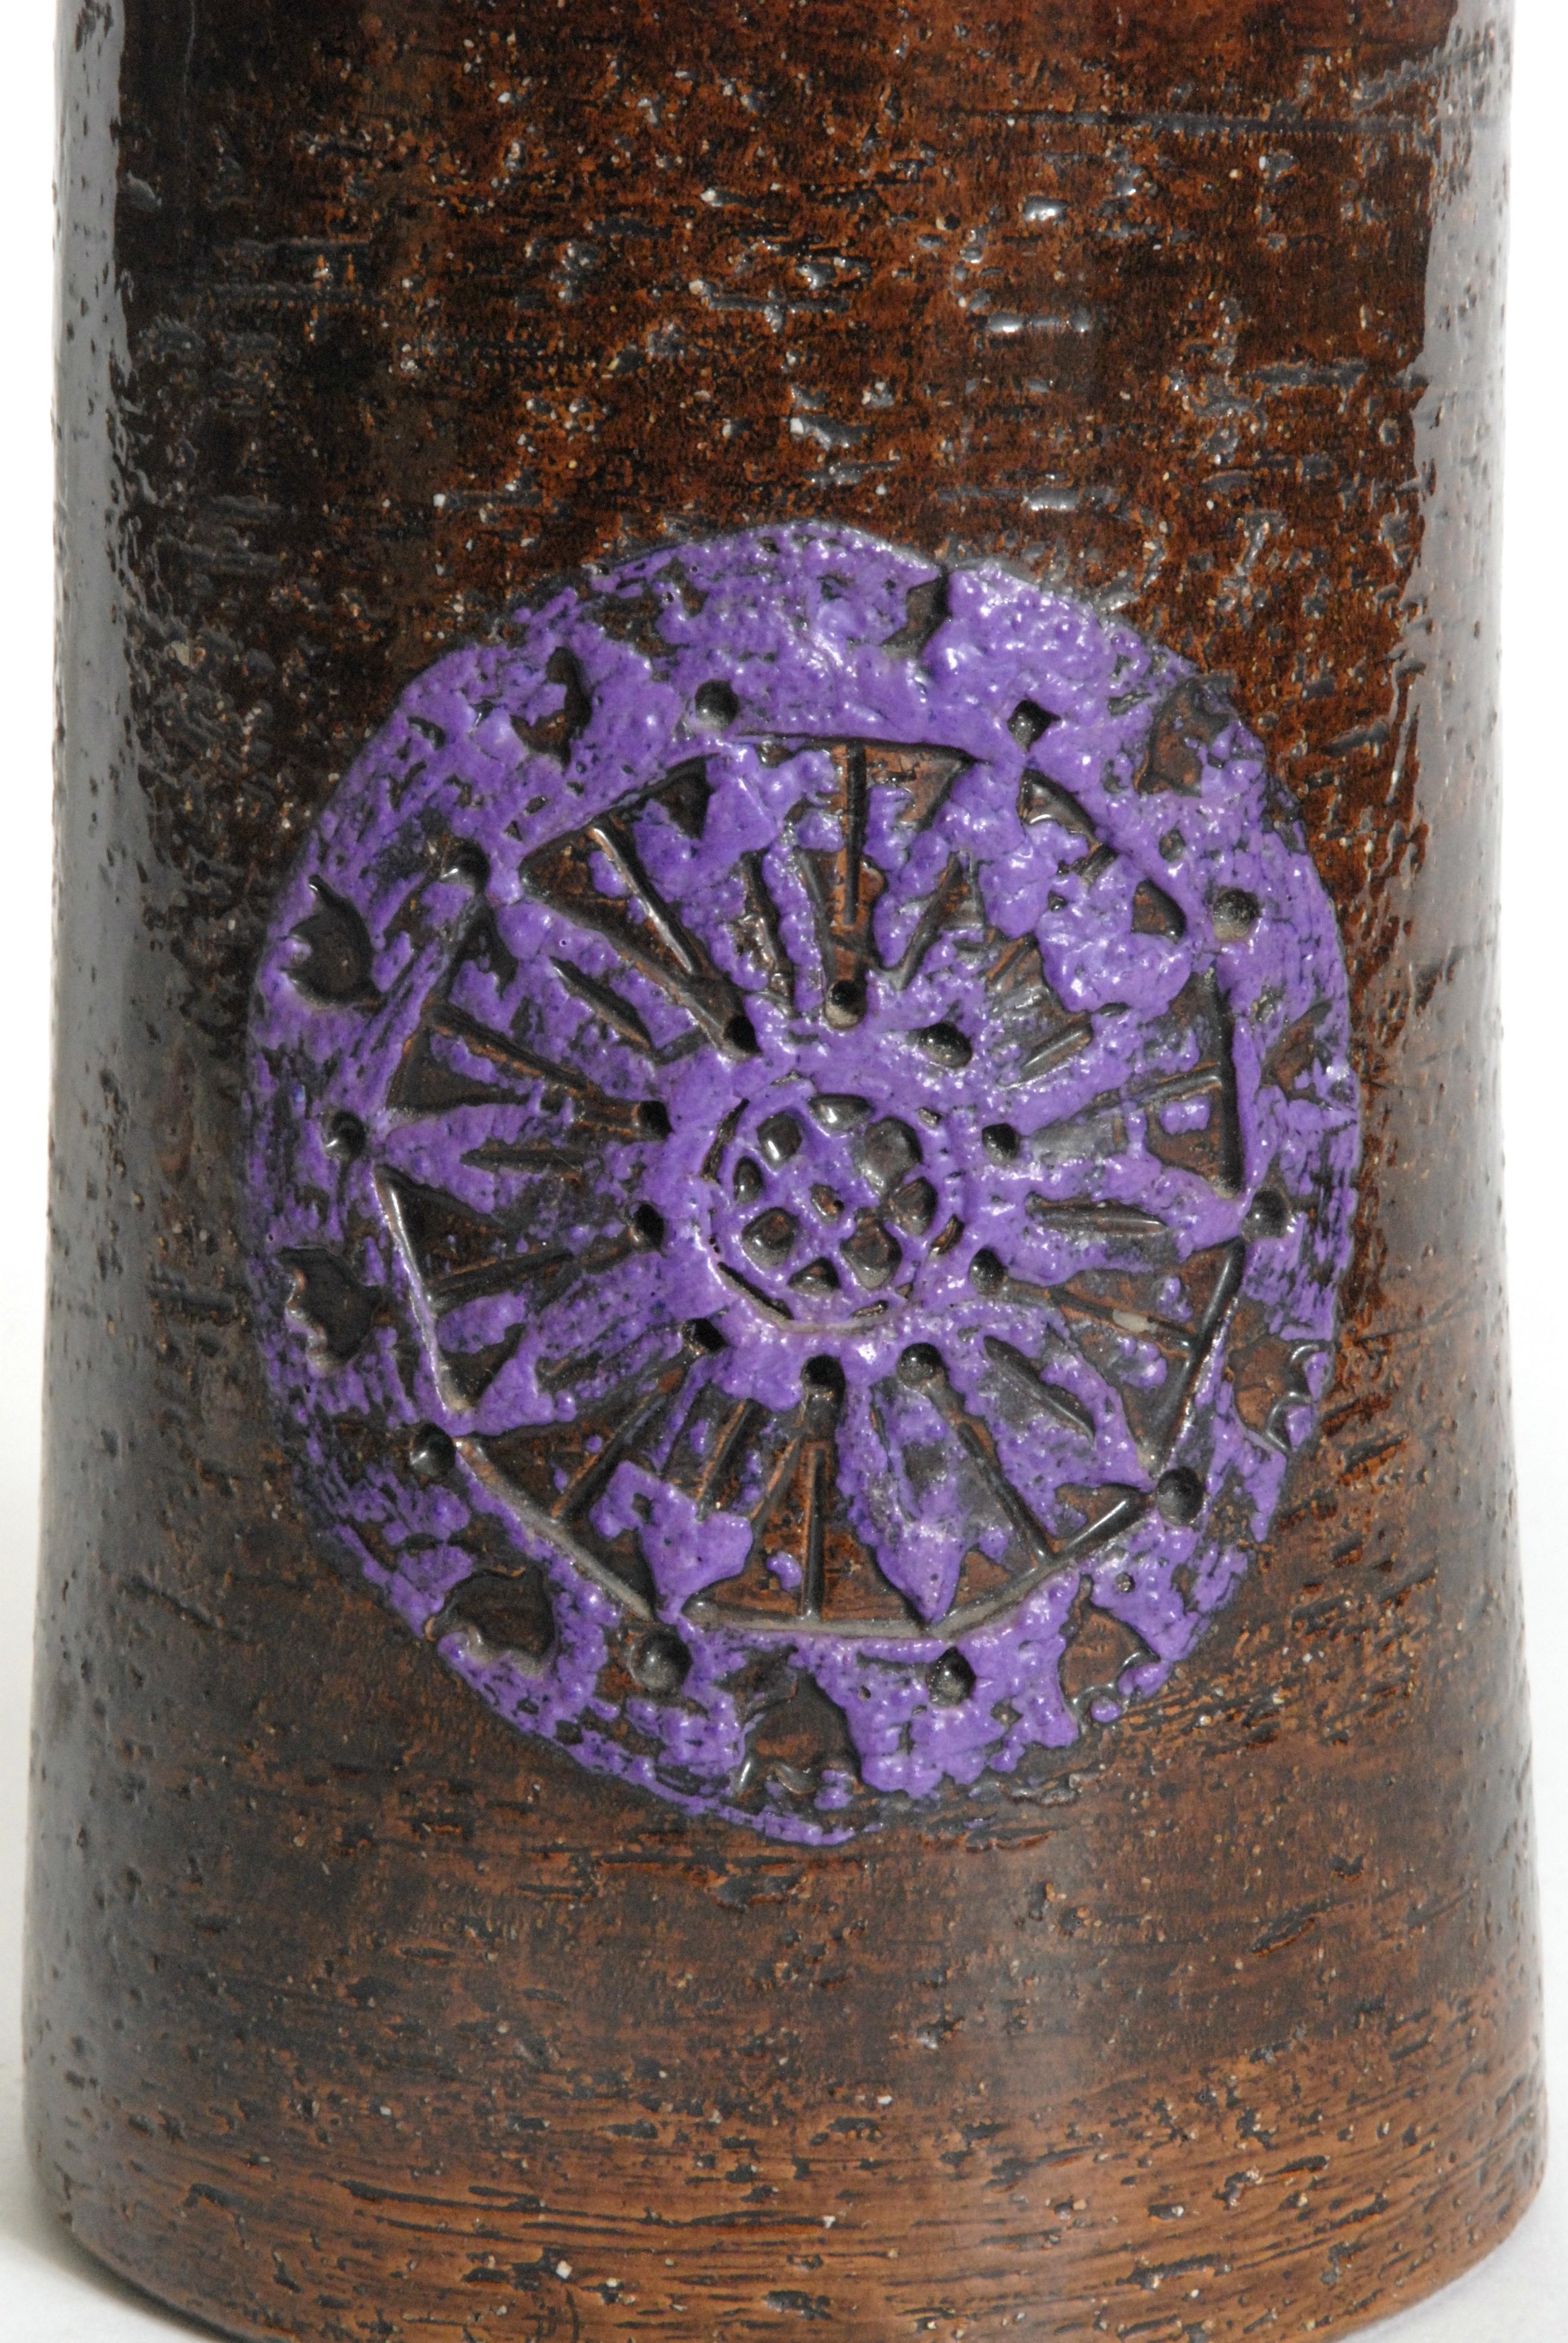 Bitossi Aldo Londi Cylinder Vase Purple Motifs, Italy, circa 1970 In Excellent Condition For Sale In Pymble, NSW